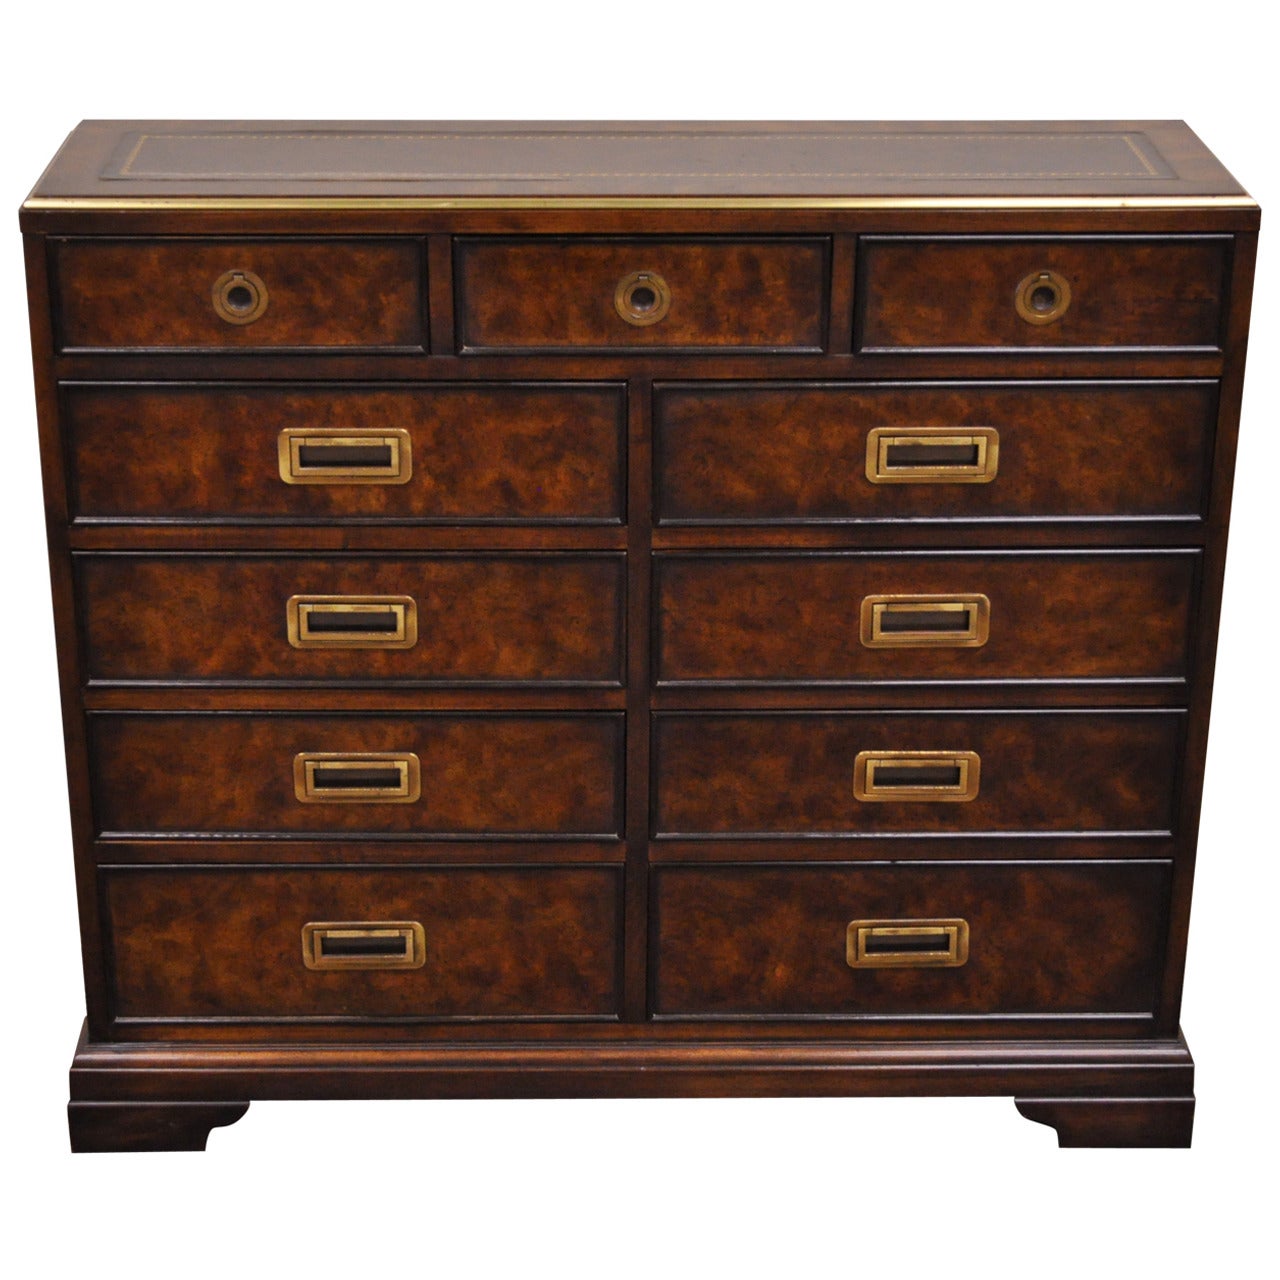 Leather Top Campaign Style Entry Chest with Brass pulls by Drexel Heritage